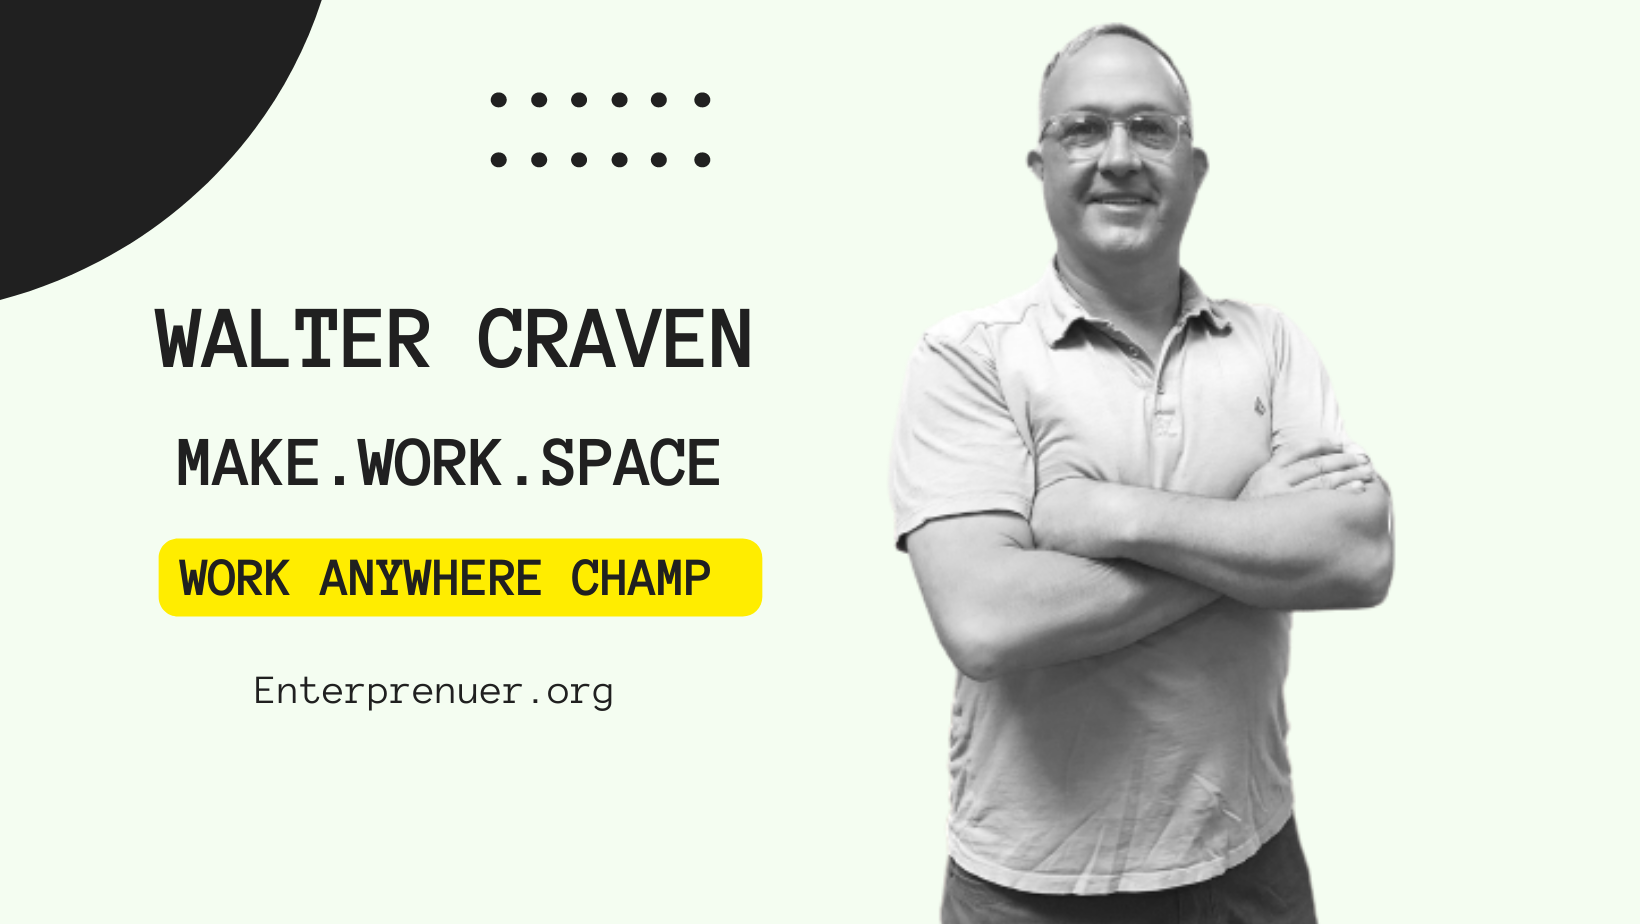 Meet Work Anywhere Champ Walter Craven, Founder of Make.Work.Space